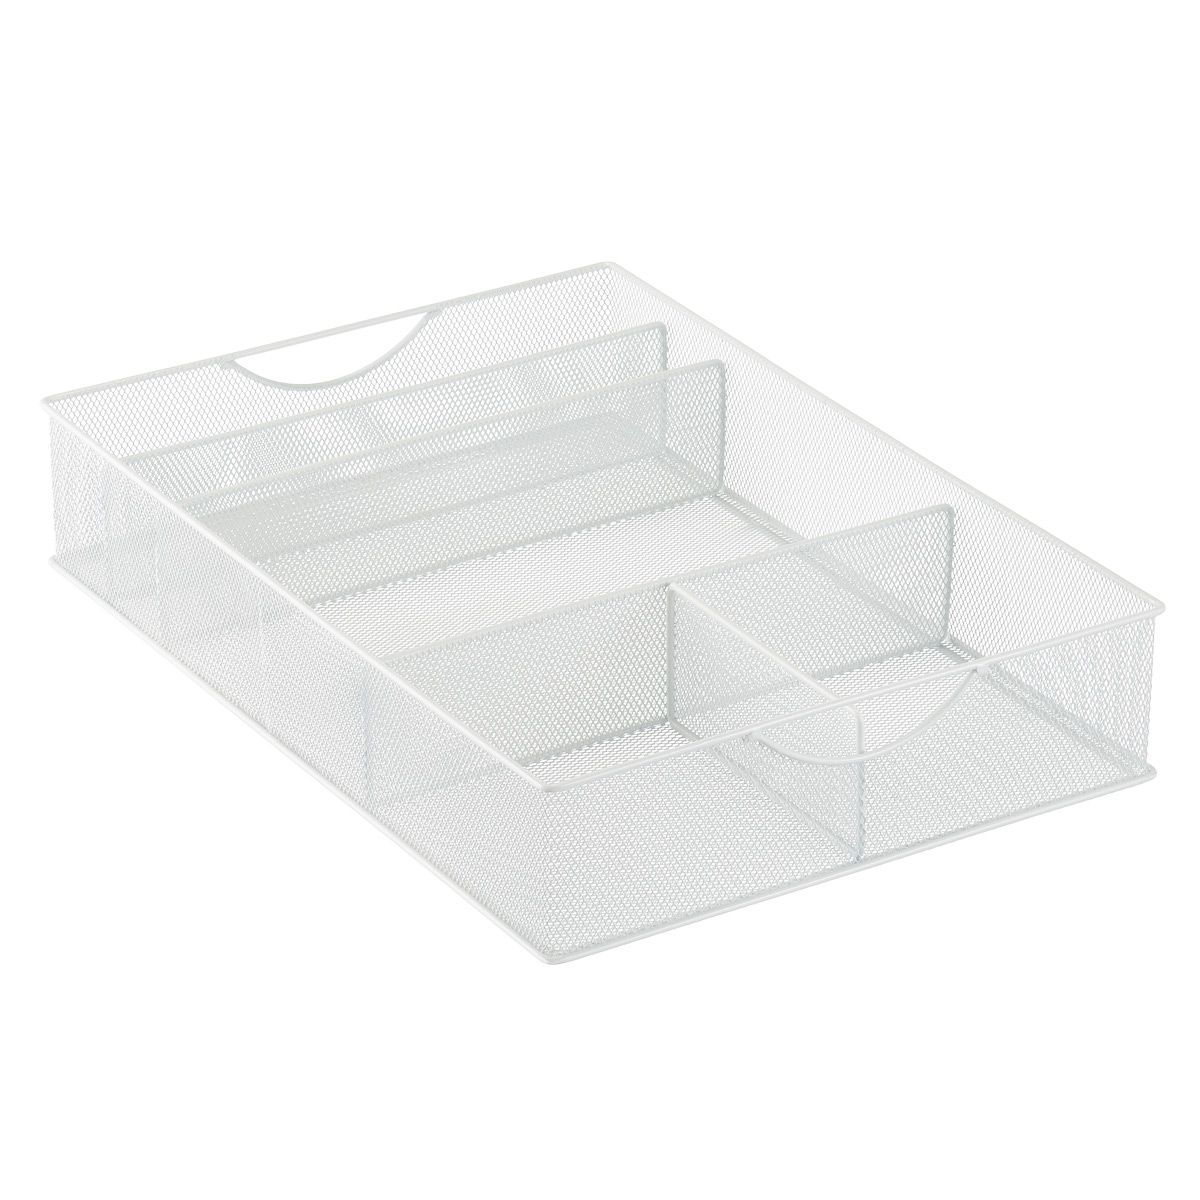 5-Section Mesh Food Storage Organizer | The Container Store